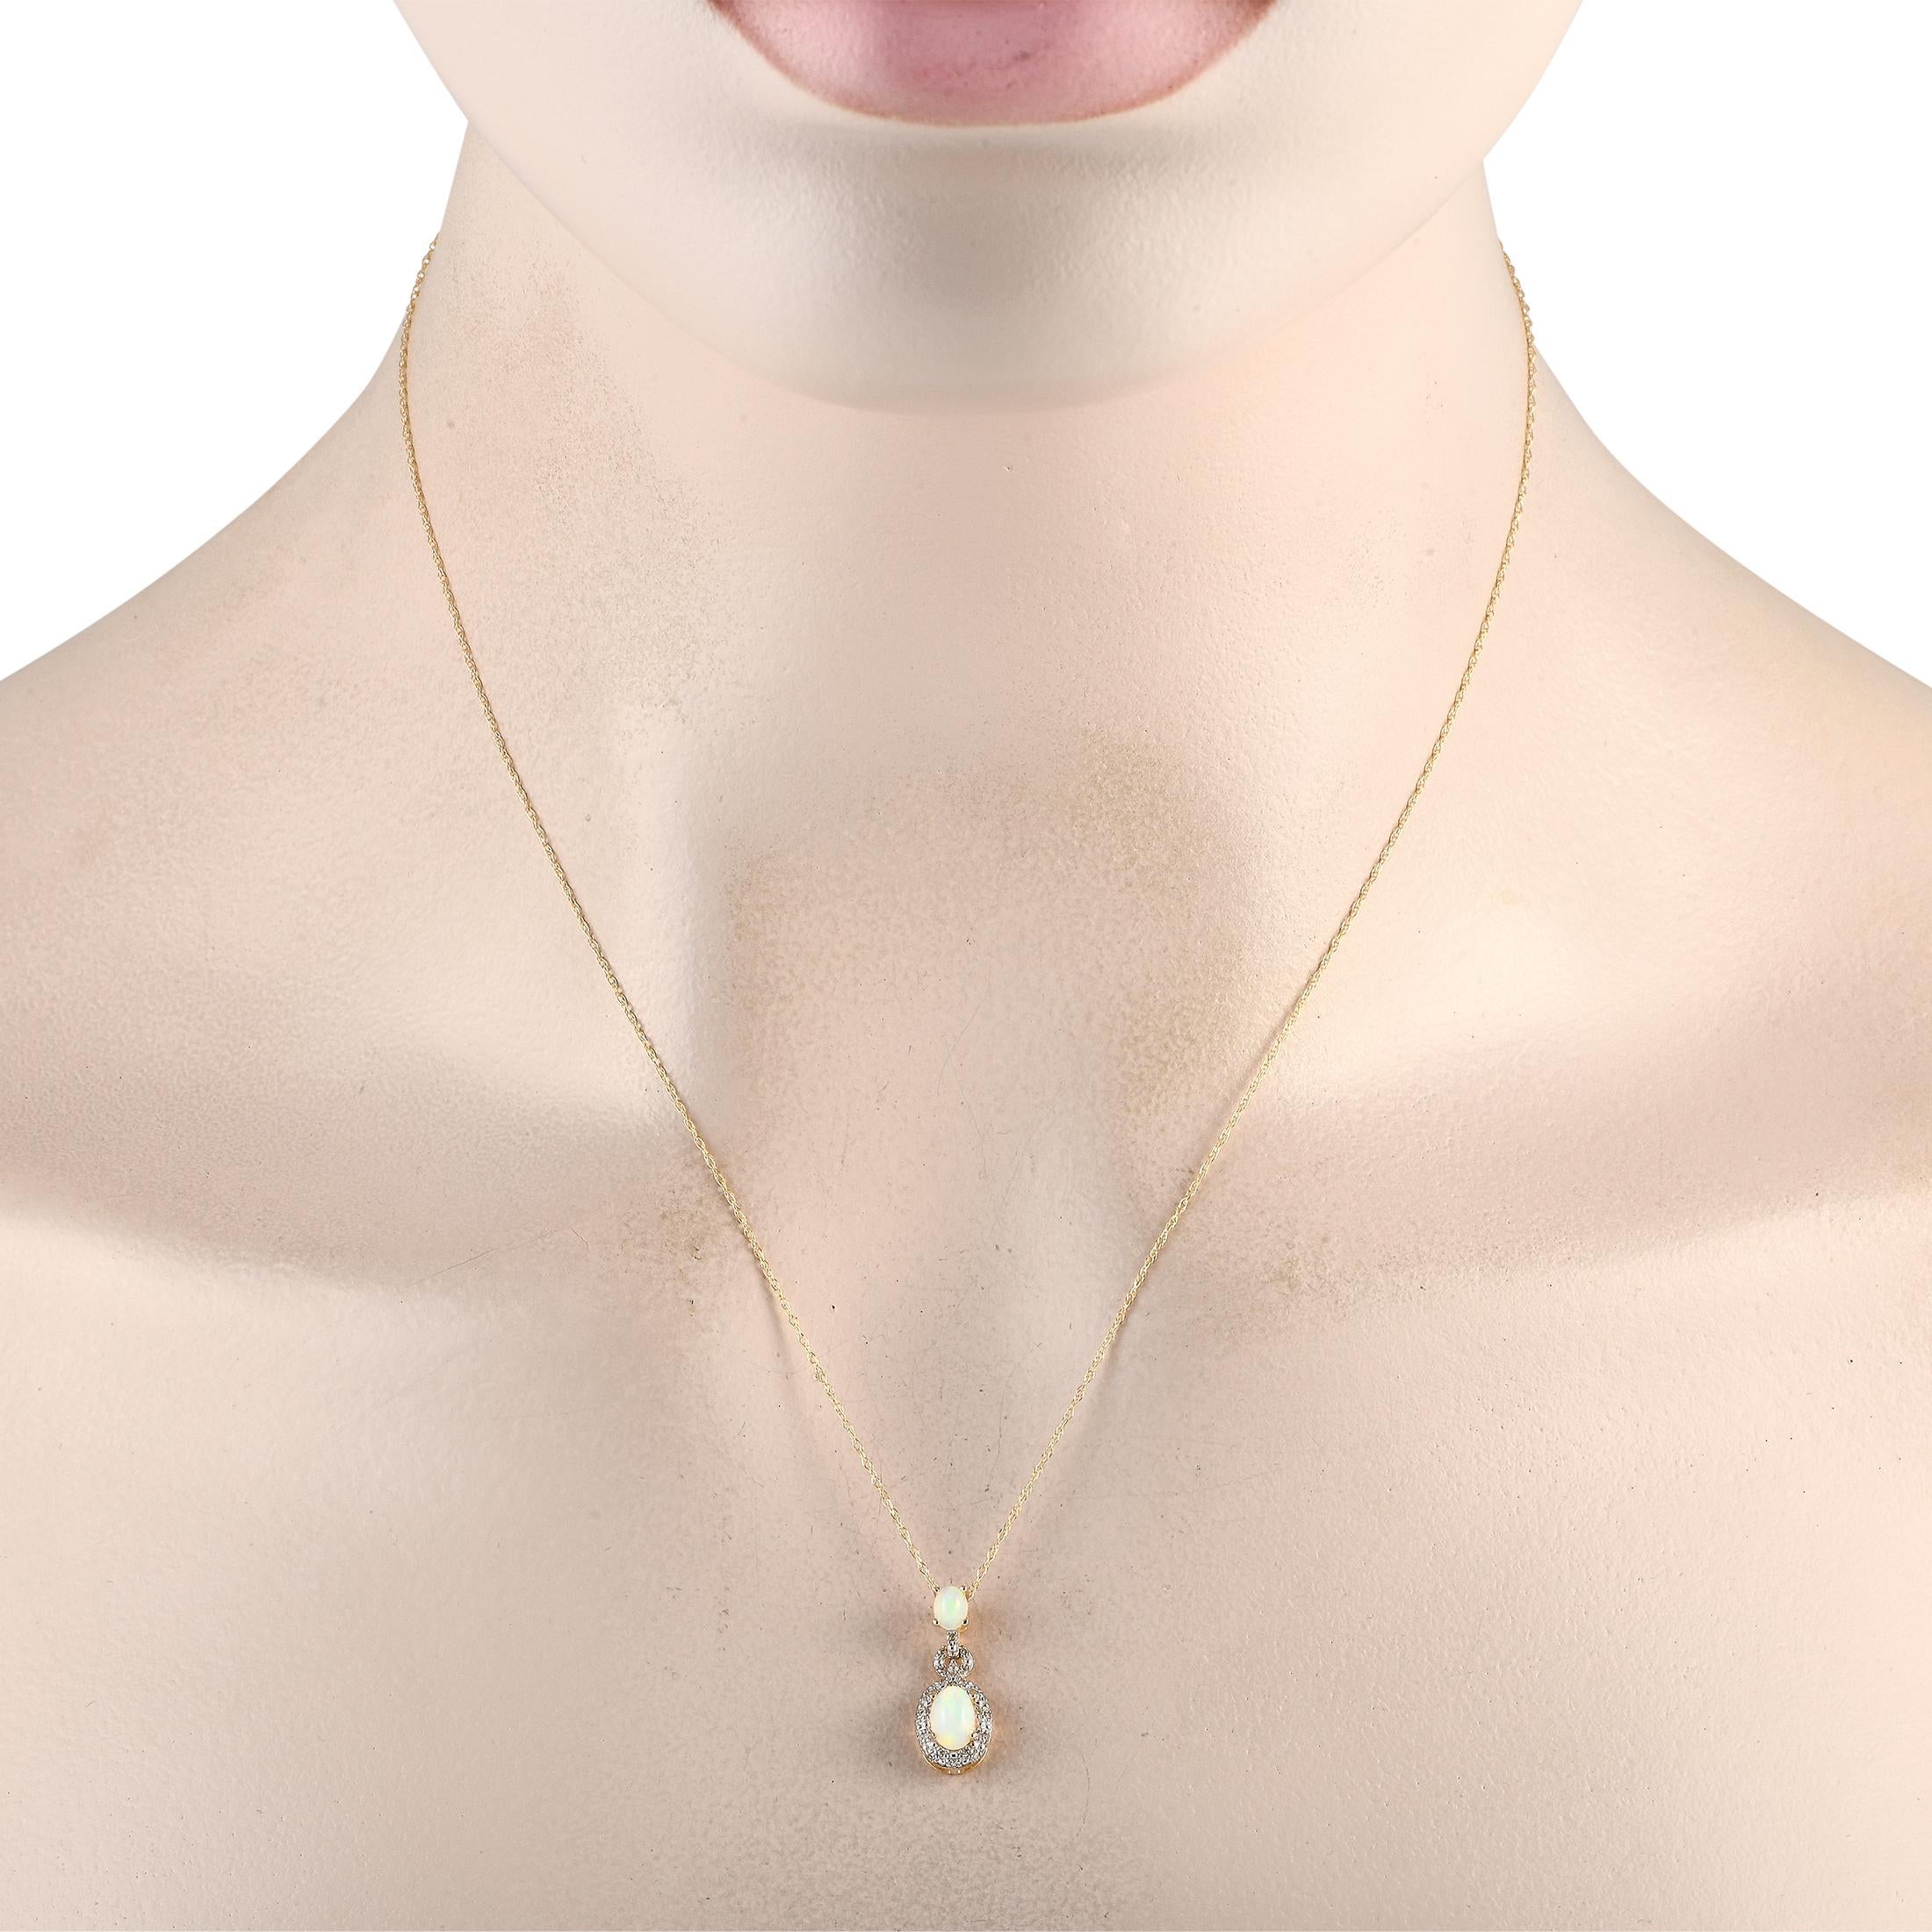 This luxurious necklace is incredibly sophisticated. Suspended from an 18 chain, youll find an elegant 14K yellow gold pendant measuring 0.75 long by 0.25 wide. A pair of radiant opals elevate this dynamic design, while sparkling diamonds totaling